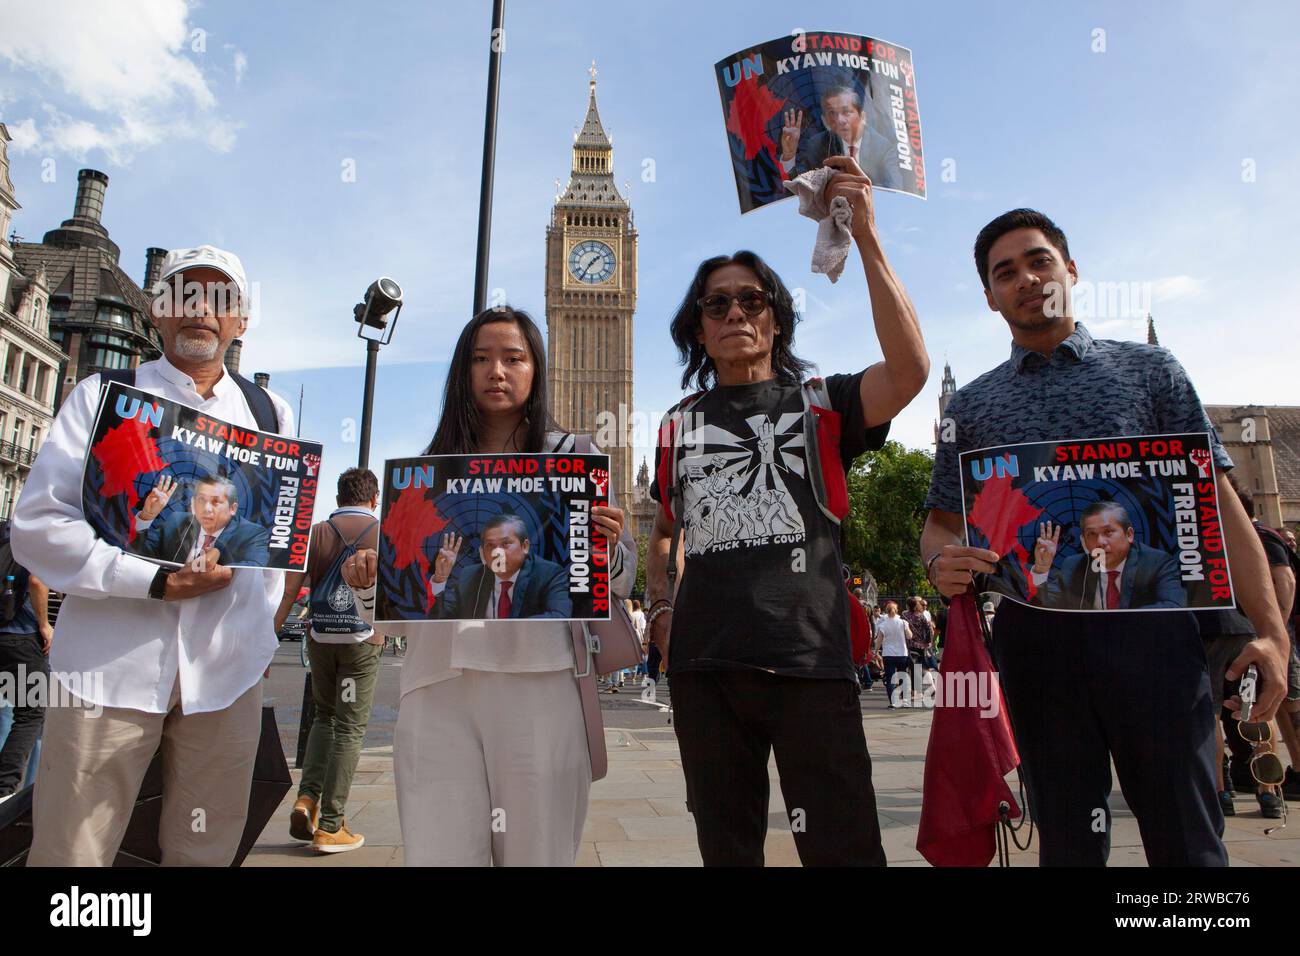 London, UK, 16 September 2023: in Parliament Square demonstrators all for UN support for Myanmar's permanent representative's stand against the military junta. Kyaw Moe Tun was appointed as Myanmar's ambassador to the UN and has refused to leave his post since the military coup, using his position to speak out against 'military atrocities'. Anna Watson/Alamy Live News Stock Photo